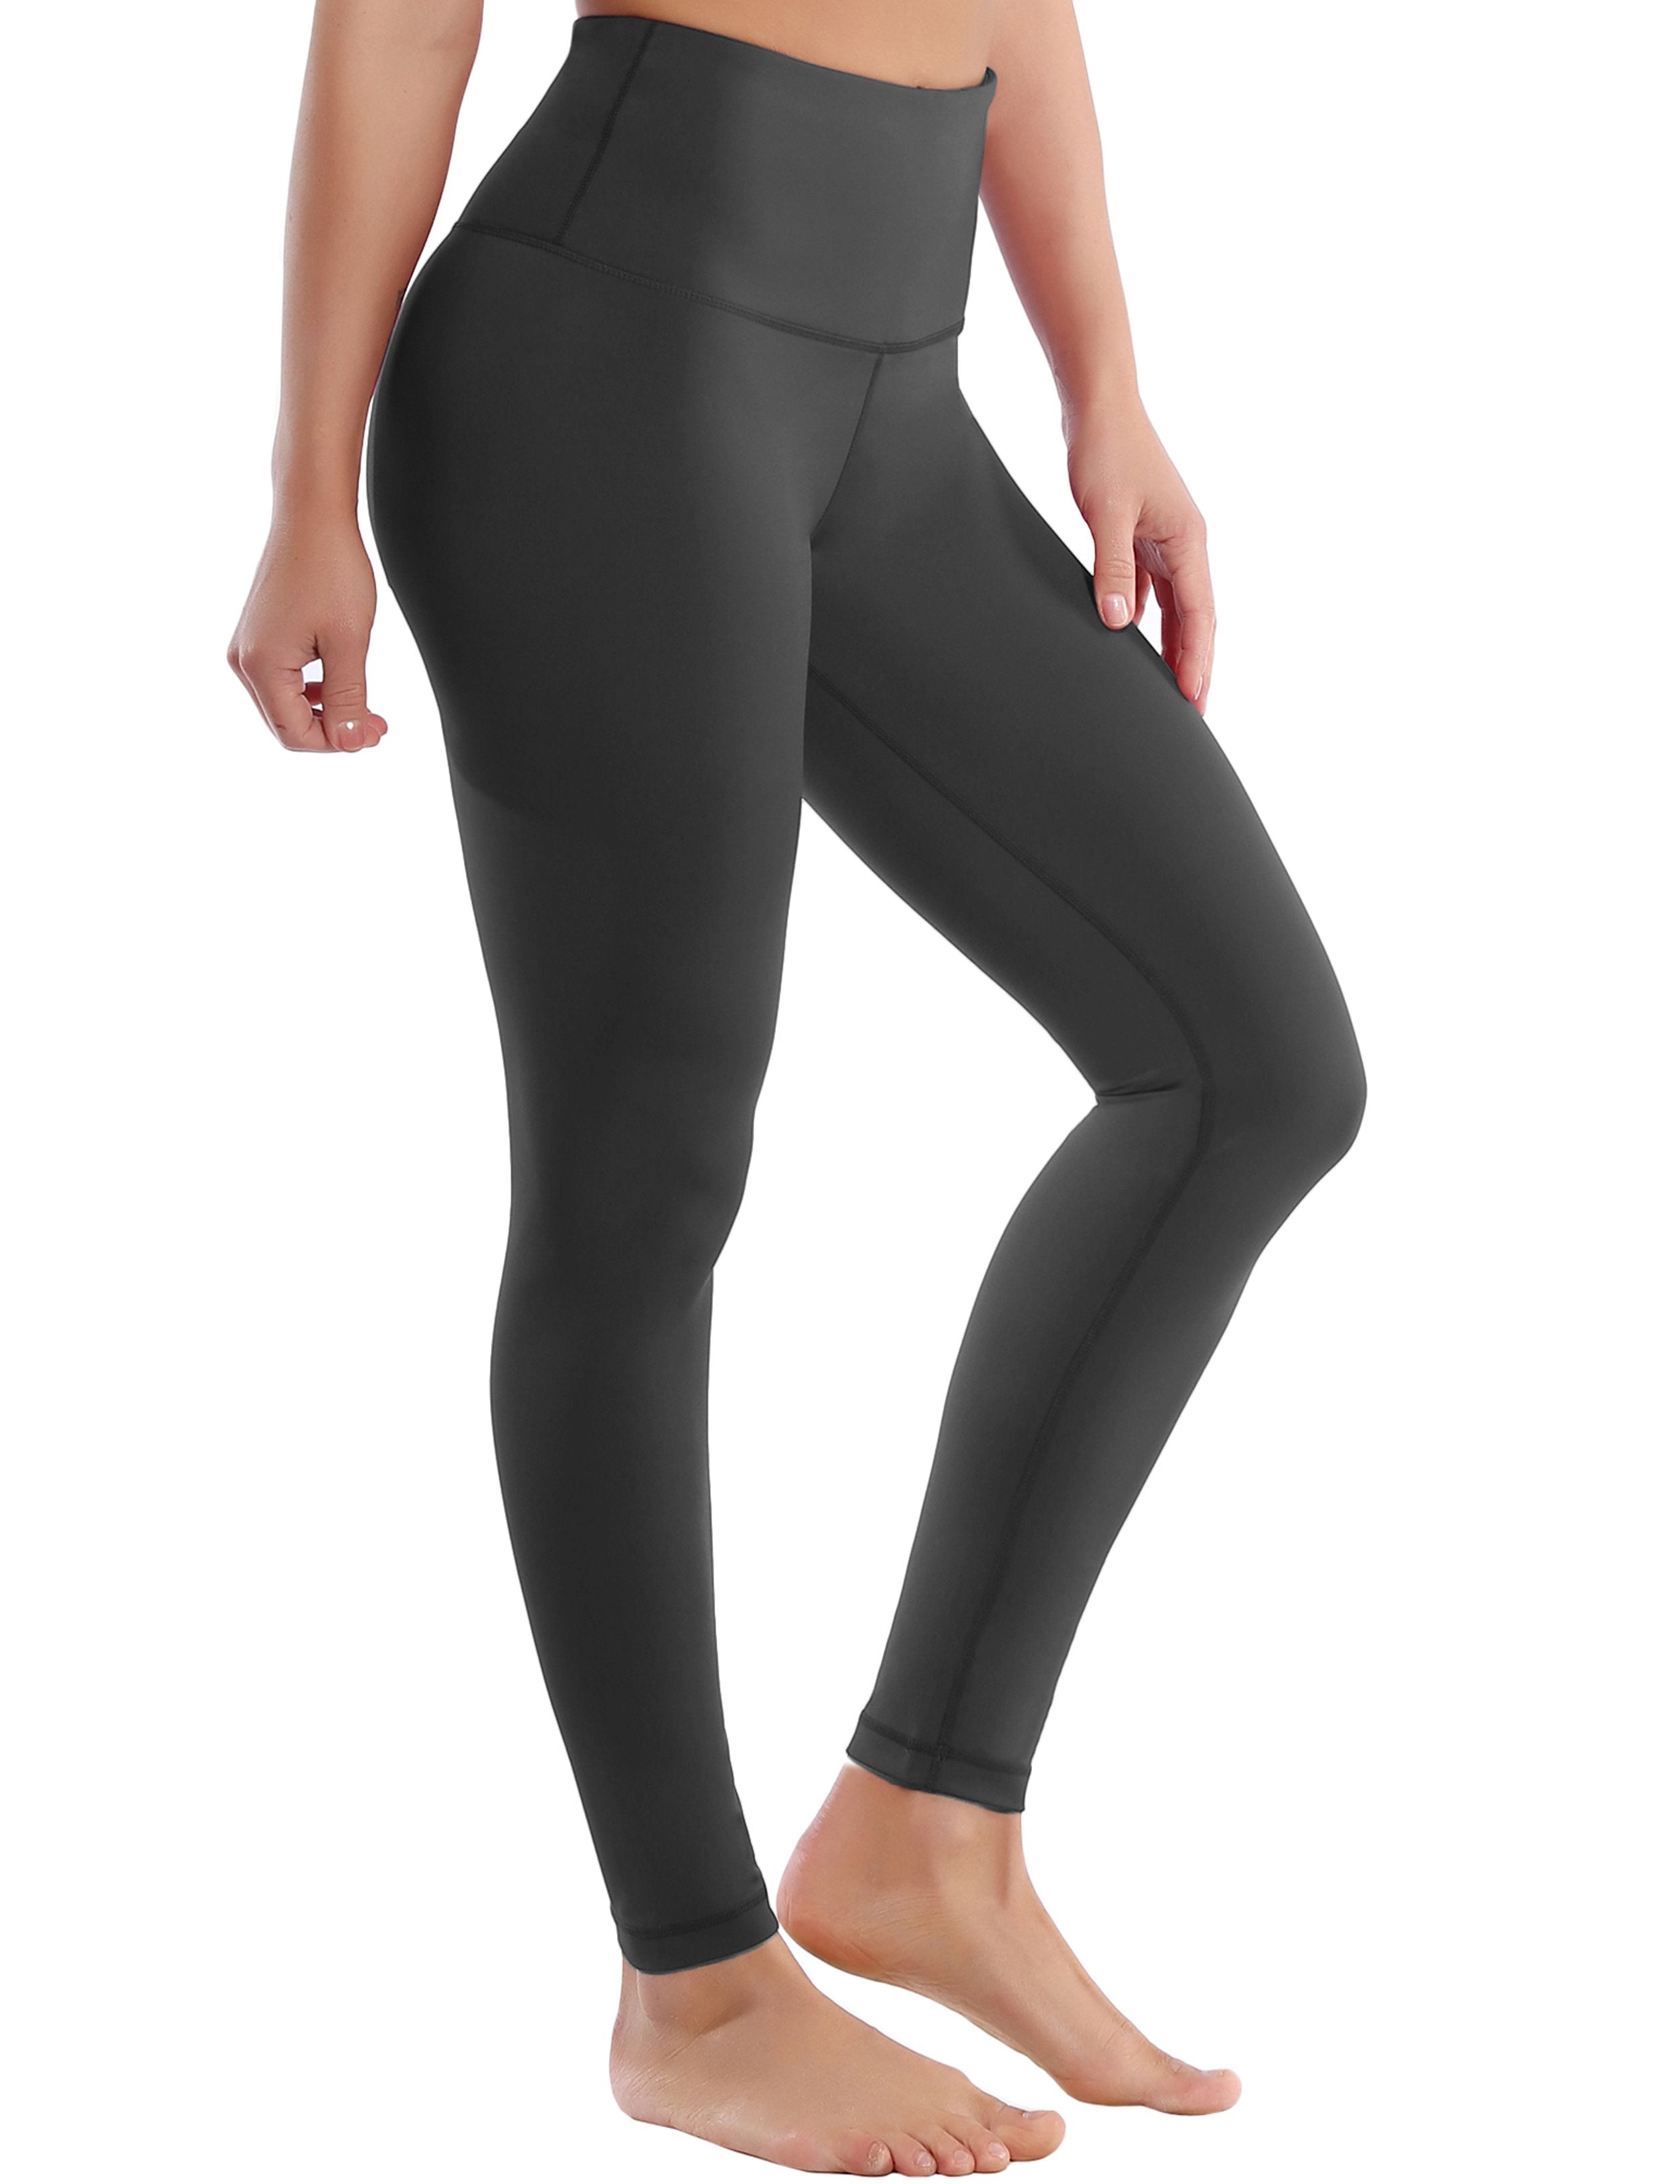 High Waist Golf Pants shadowcharcoal 75%Nylon/25%Spandex Fabric doesn't attract lint easily 4-way stretch No see-through Moisture-wicking Tummy control Inner pocket Four lengths